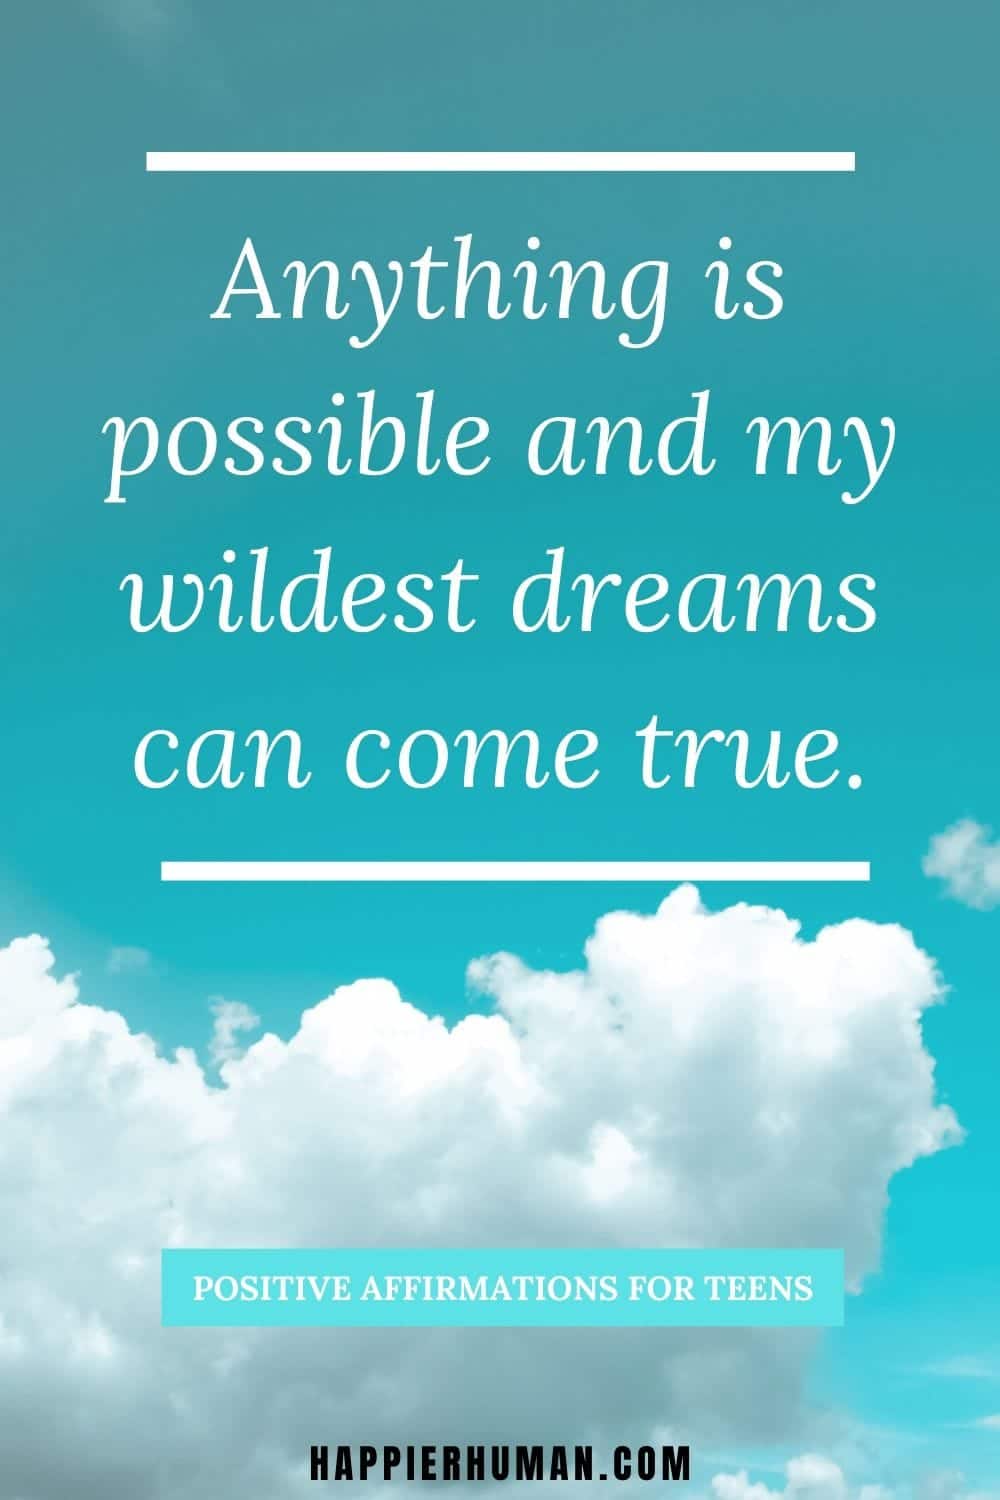 Positive Affirmations for Teens - Anything is possible and my wildest dreams can come true. | are affirmation related to positive thinking | what are positive affirmations | little girl affirmations #inspirational #love #strength